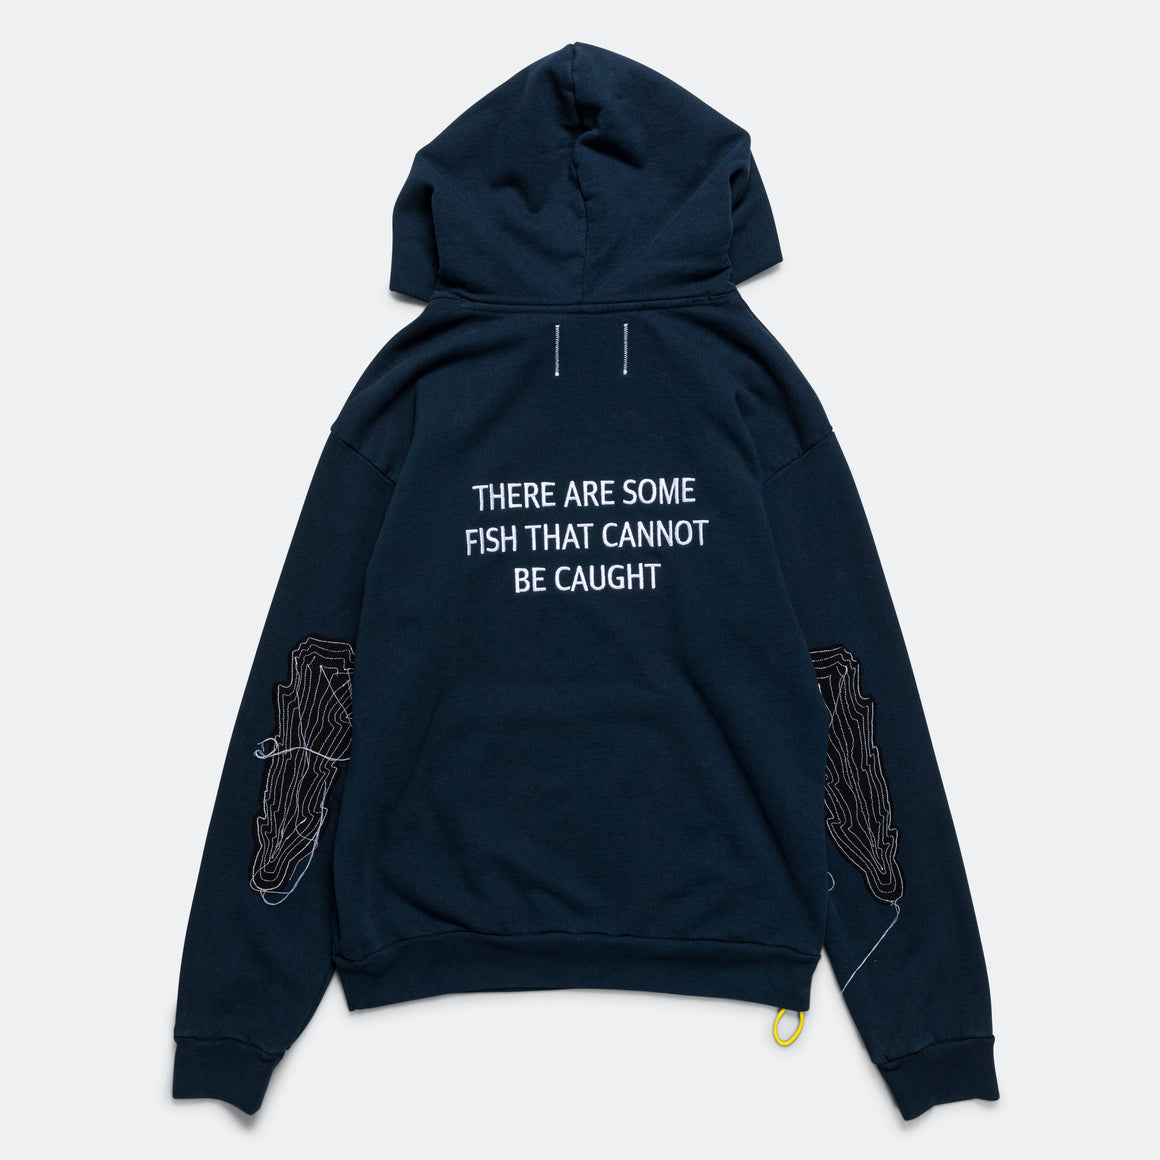 Western Hydrodynamic Research - Cannot Be Caught Hoodie - Navy - UP THERE